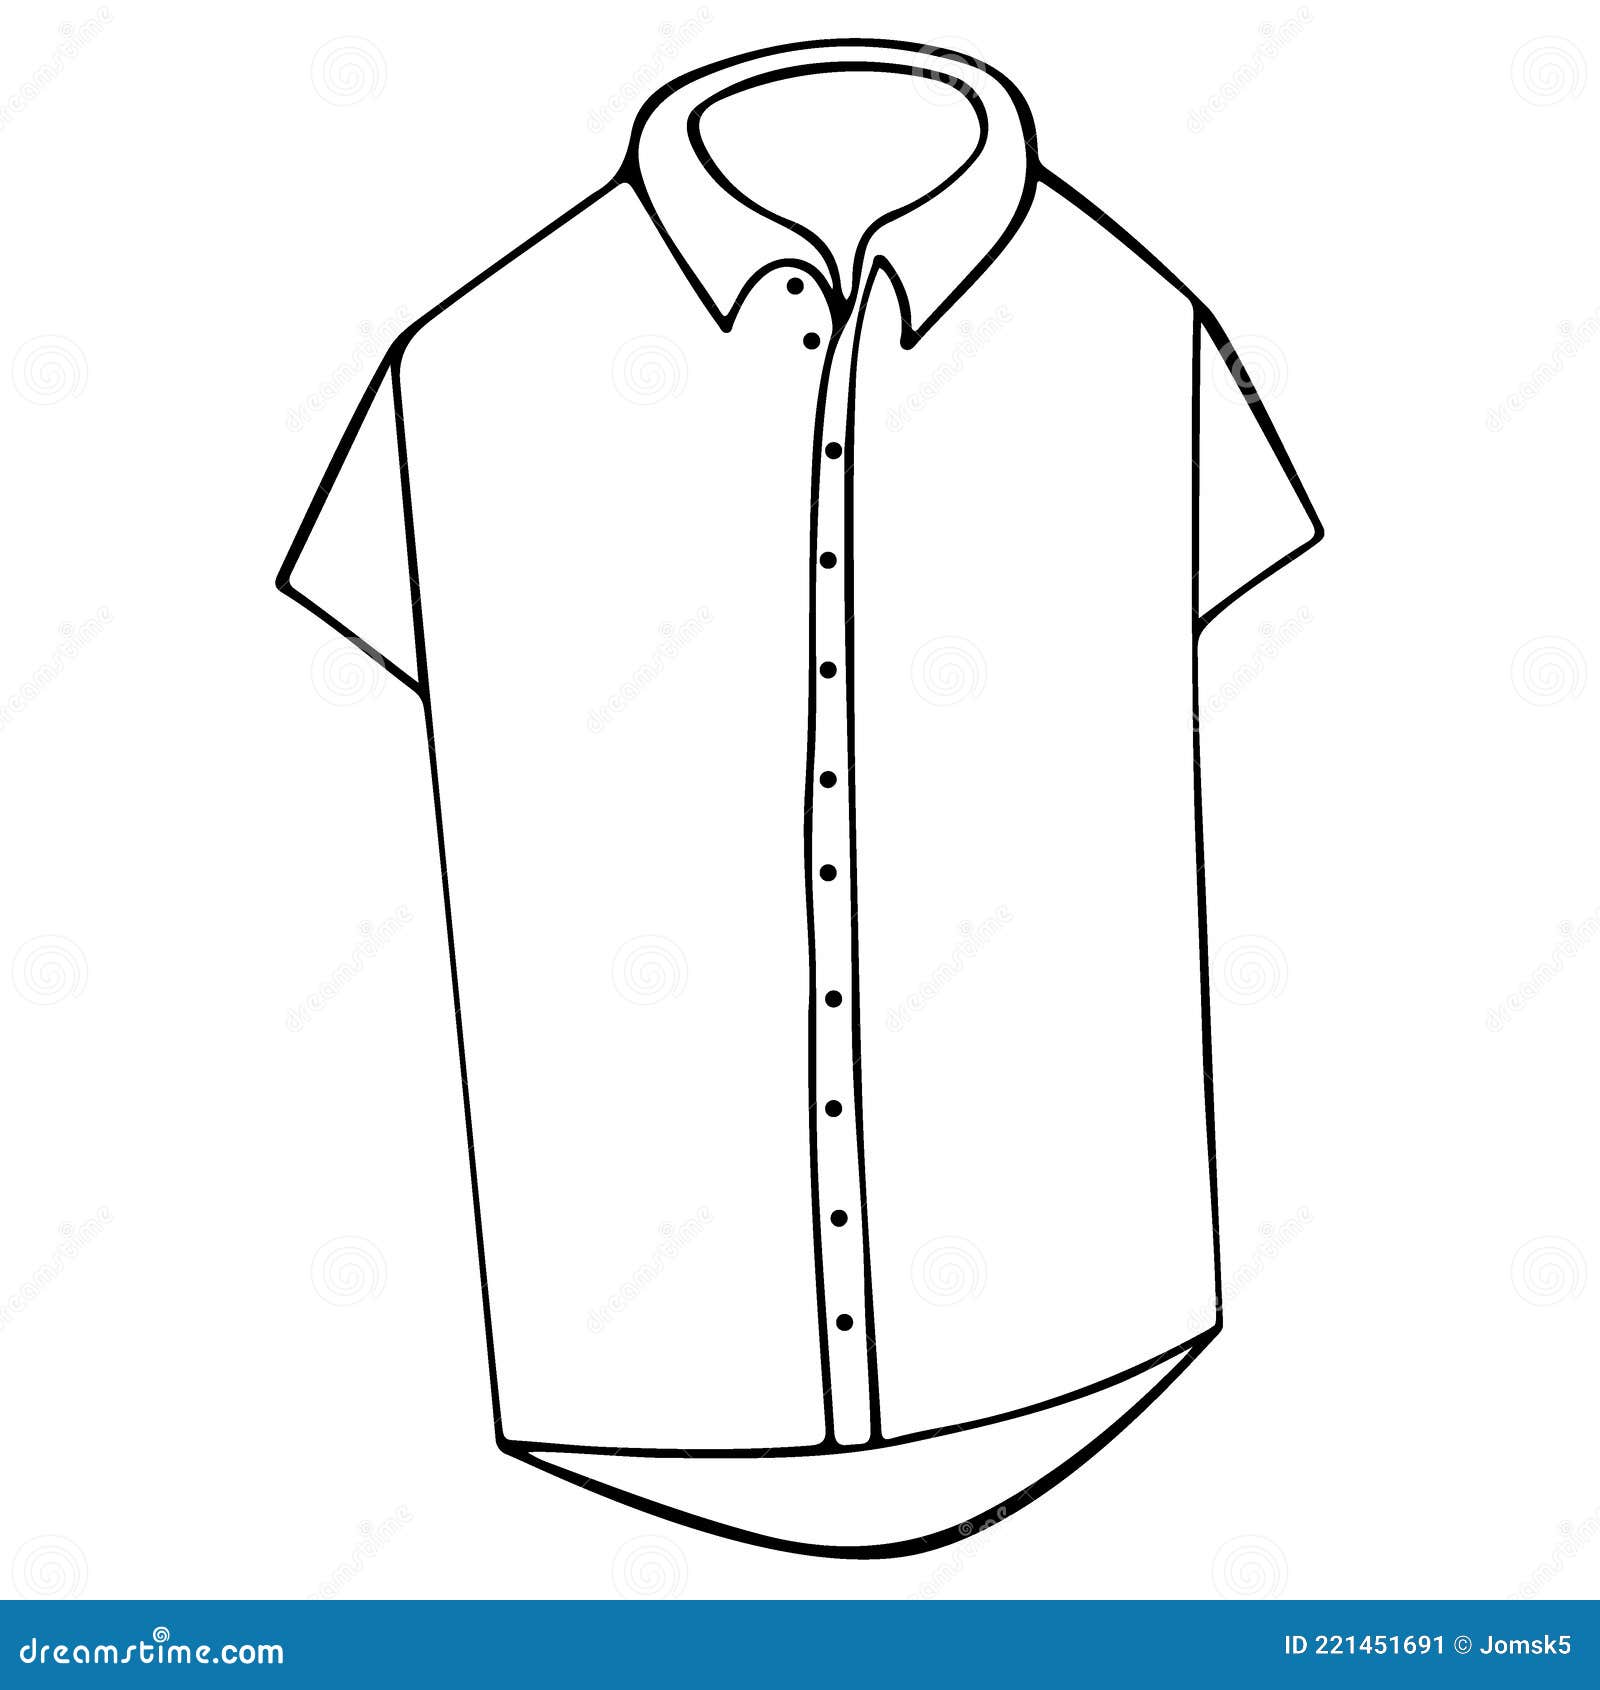 Shirt hand drawn sketch stock vector. Illustration of background ...